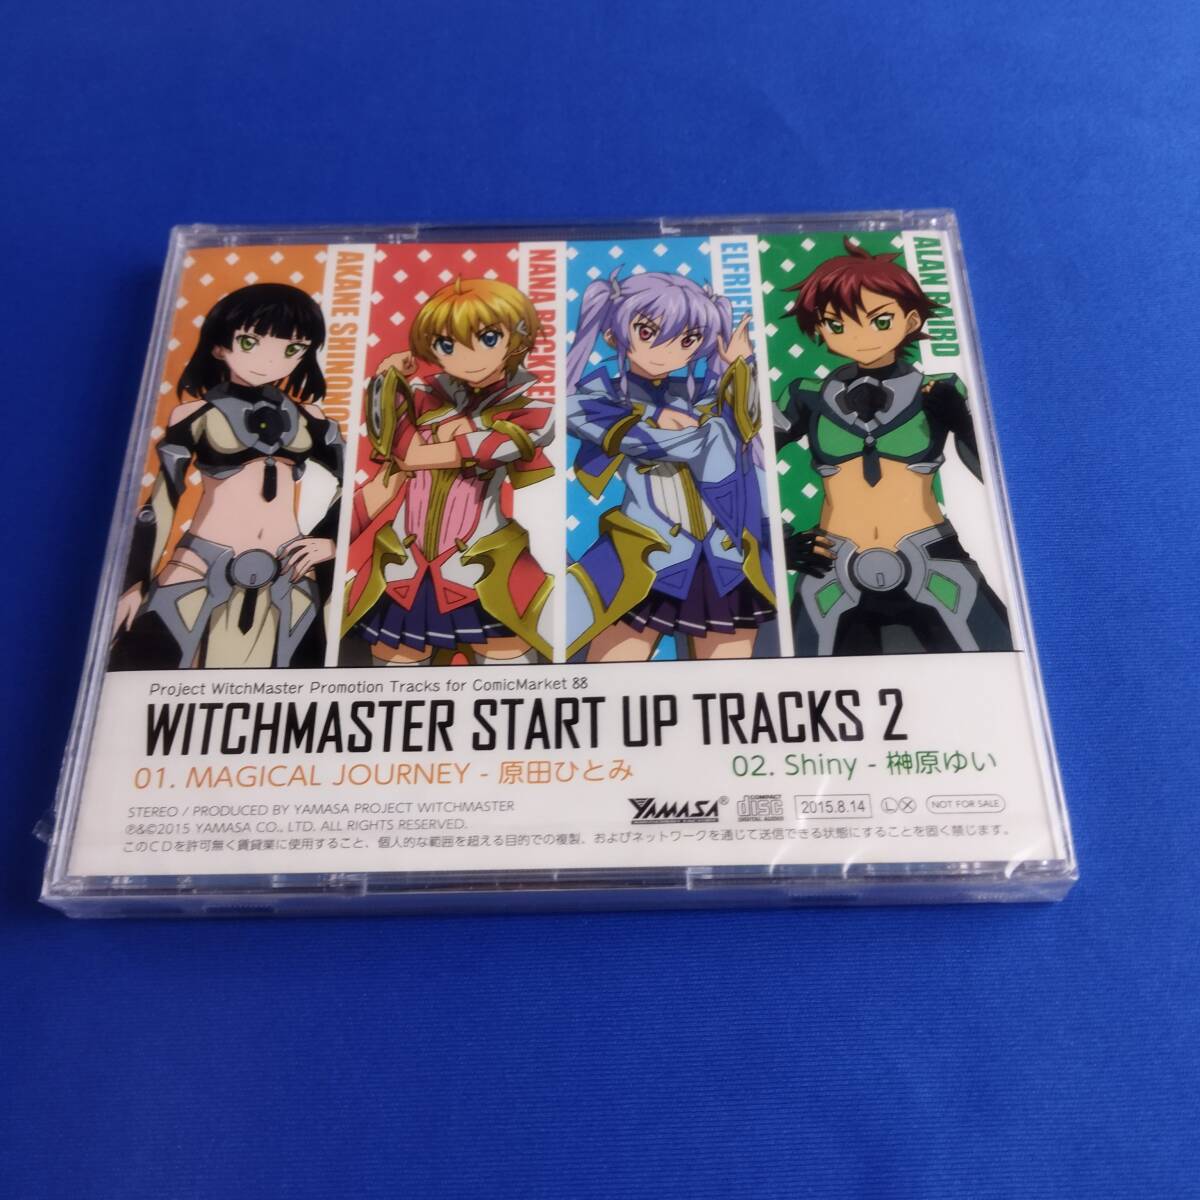 1SC5 未開封 CD WITCHMASTER START UP TRACKS 2 MAGICAL JOURNEY Shiny ヤマサ パチスロ 音楽_画像2